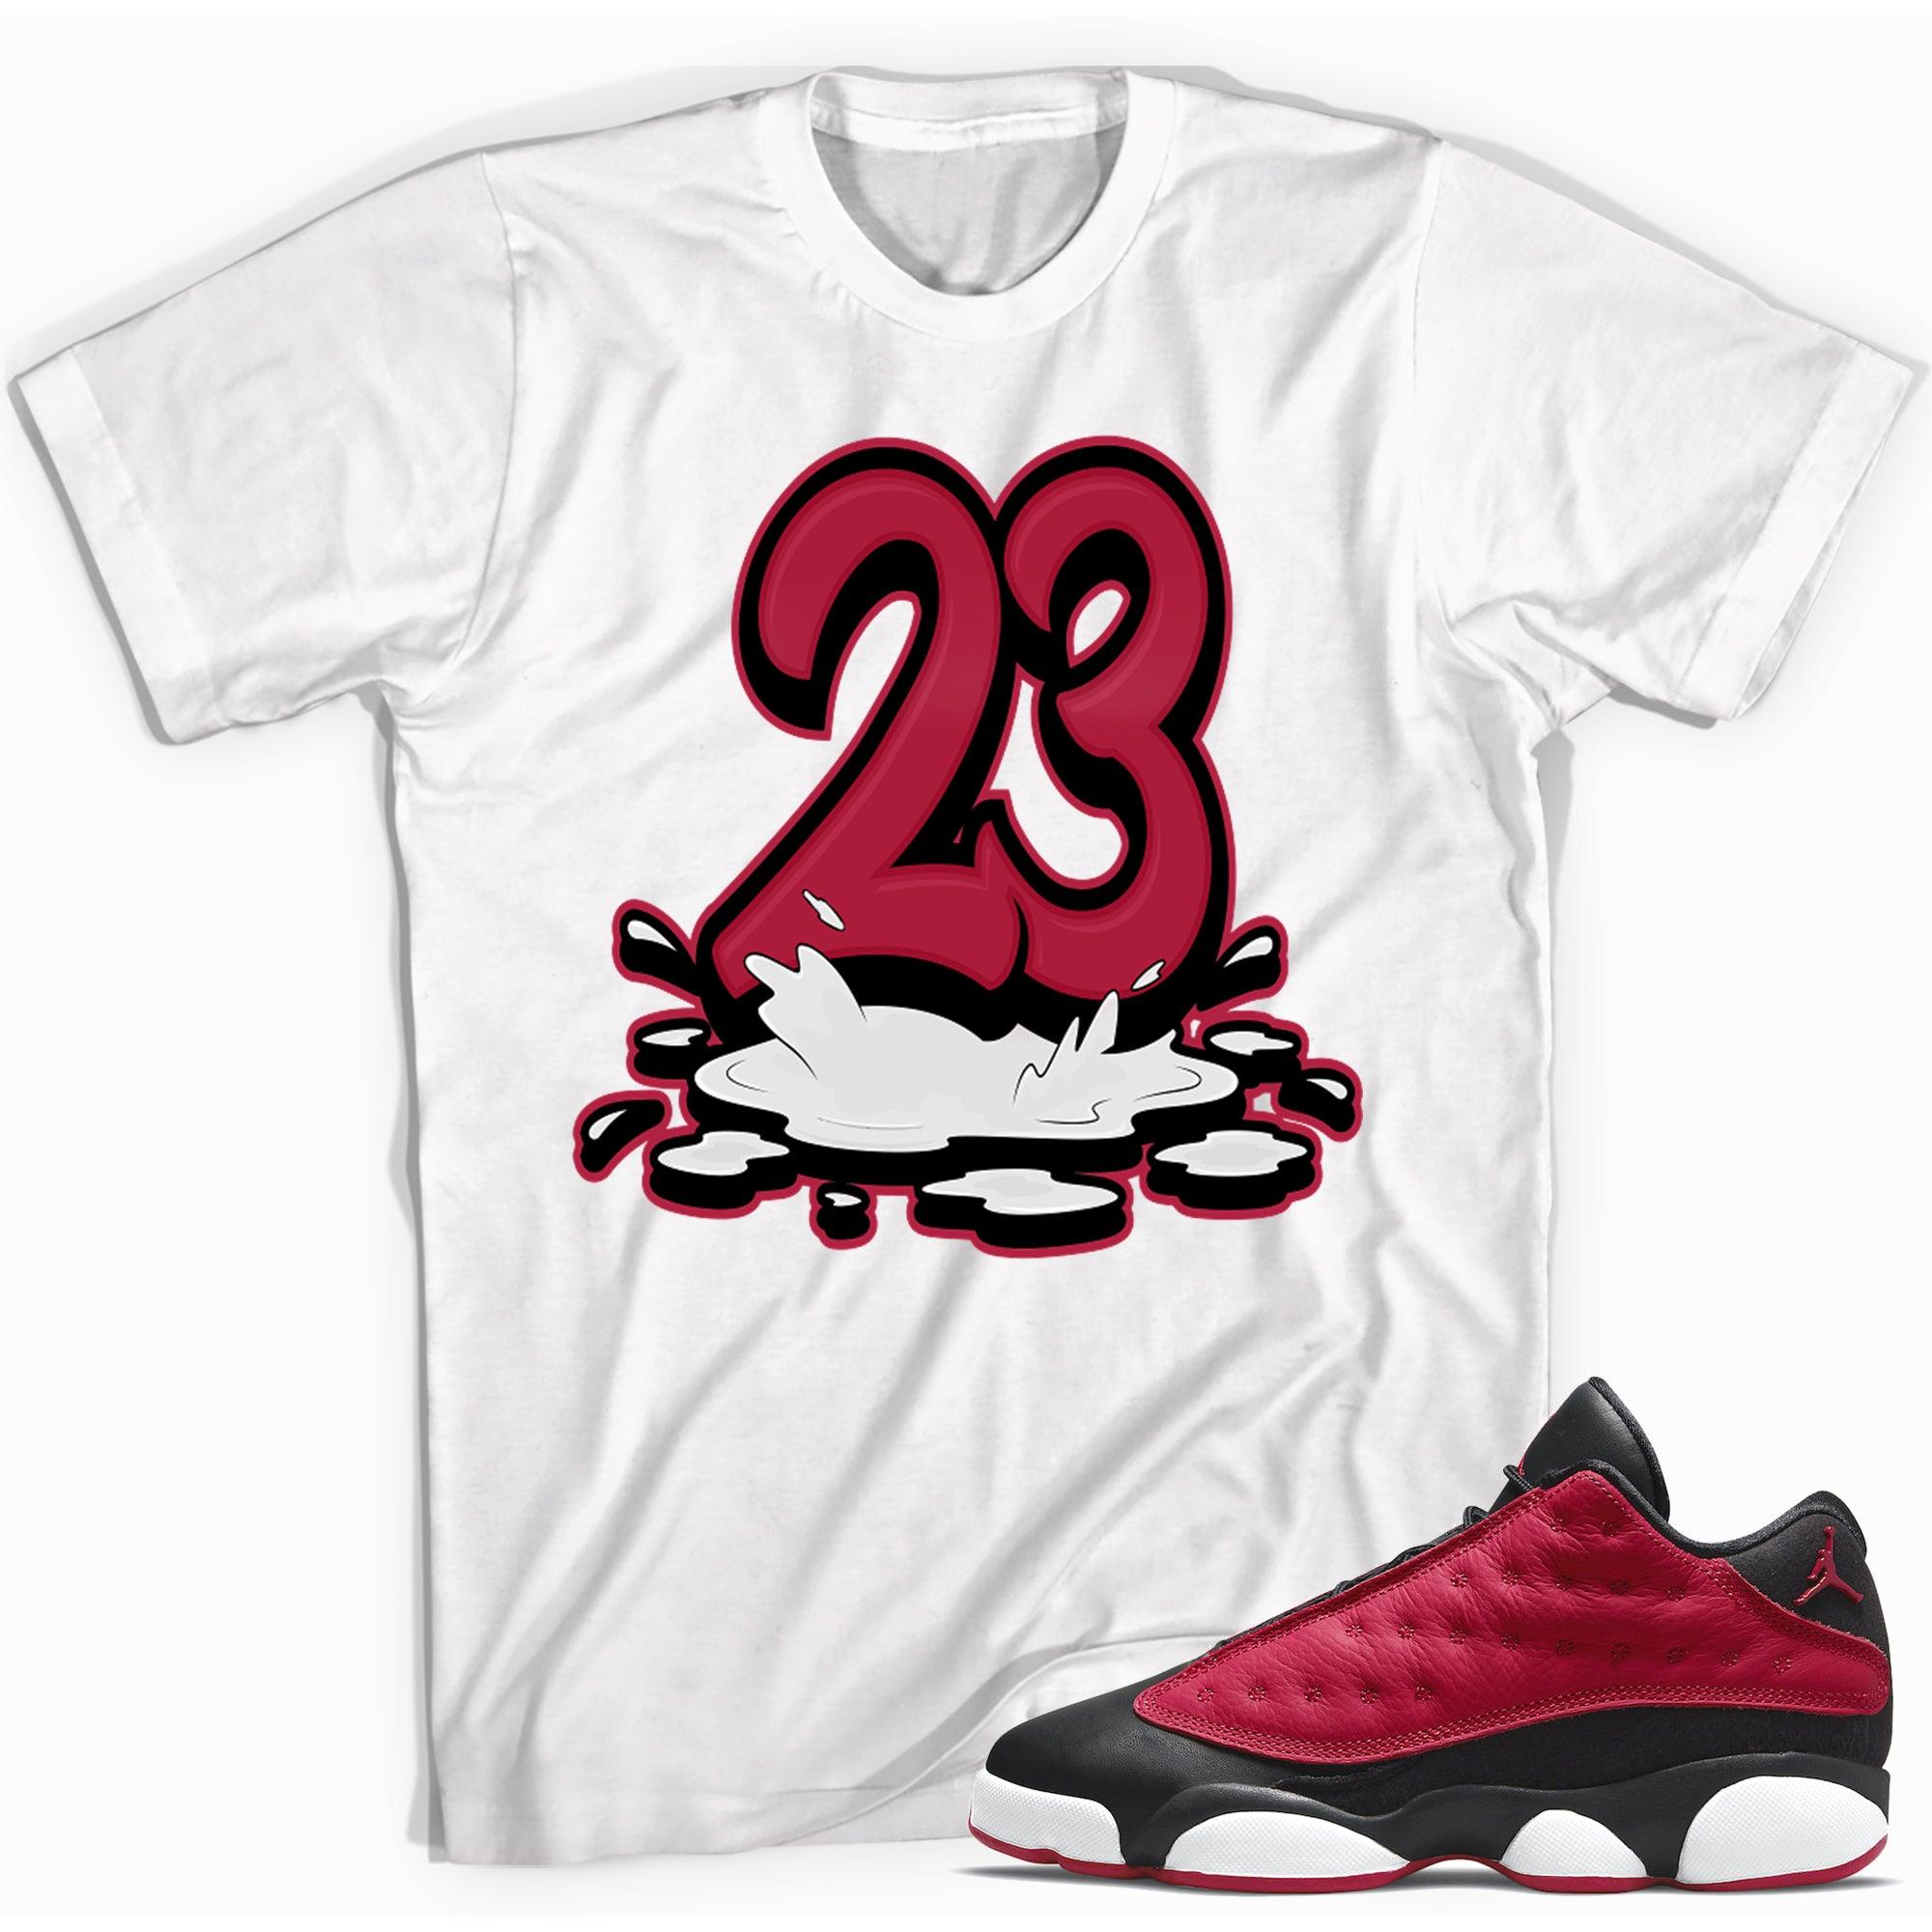 Number 23 Melting Shirt AJ 13 Very Berry Low GS photo